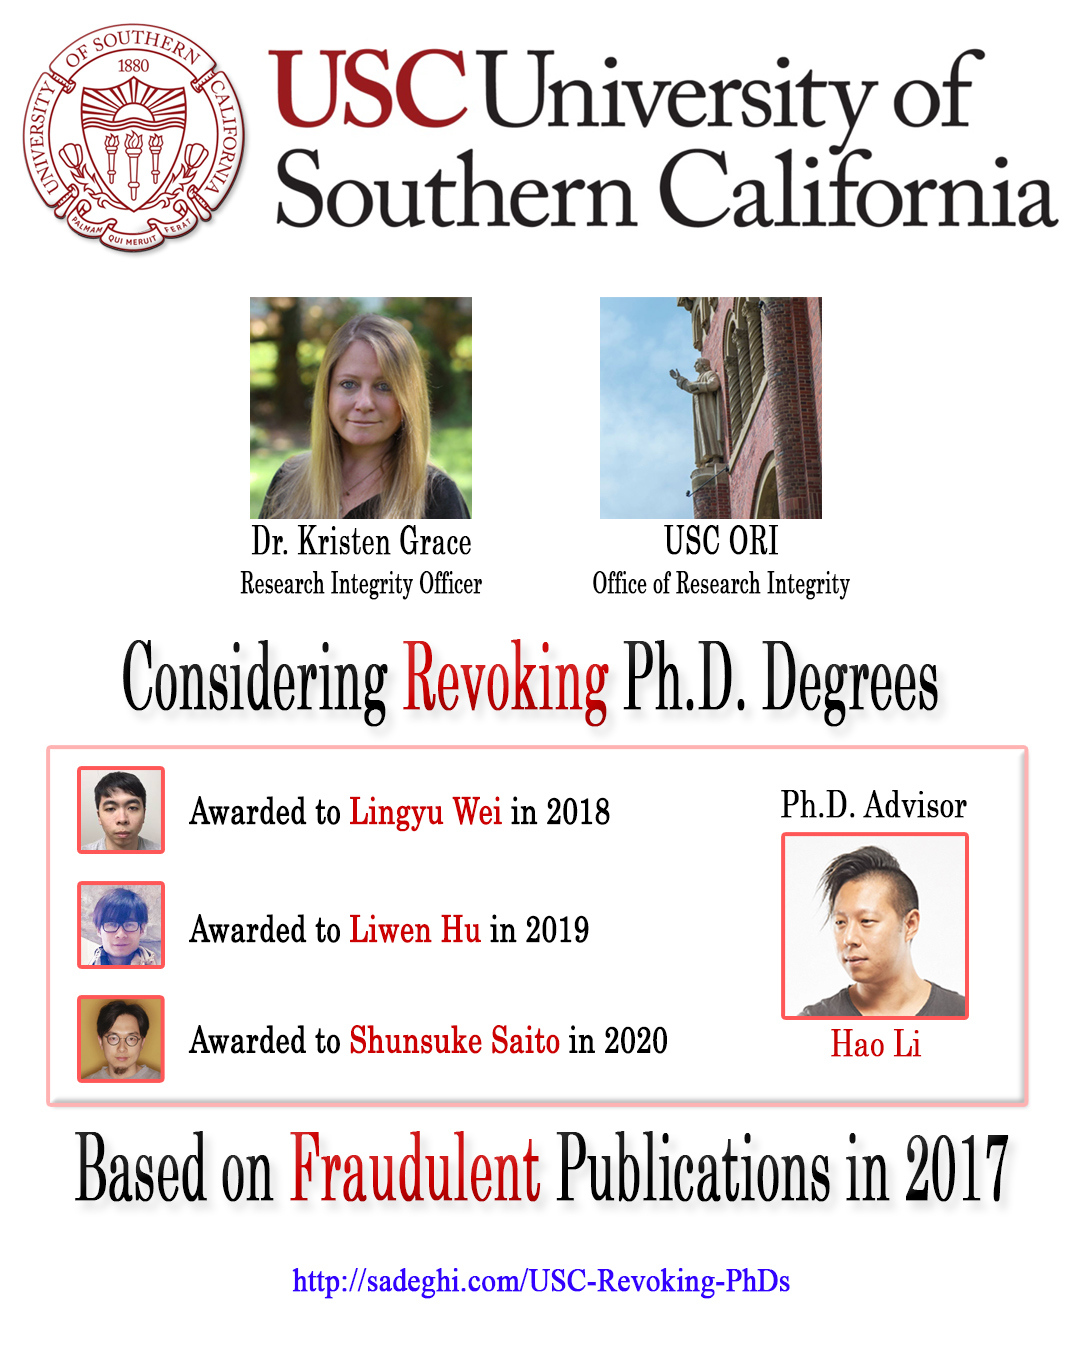 USC Is Considering Revoking Doctorate Degrees Awarded Based on Fraudulent Publications